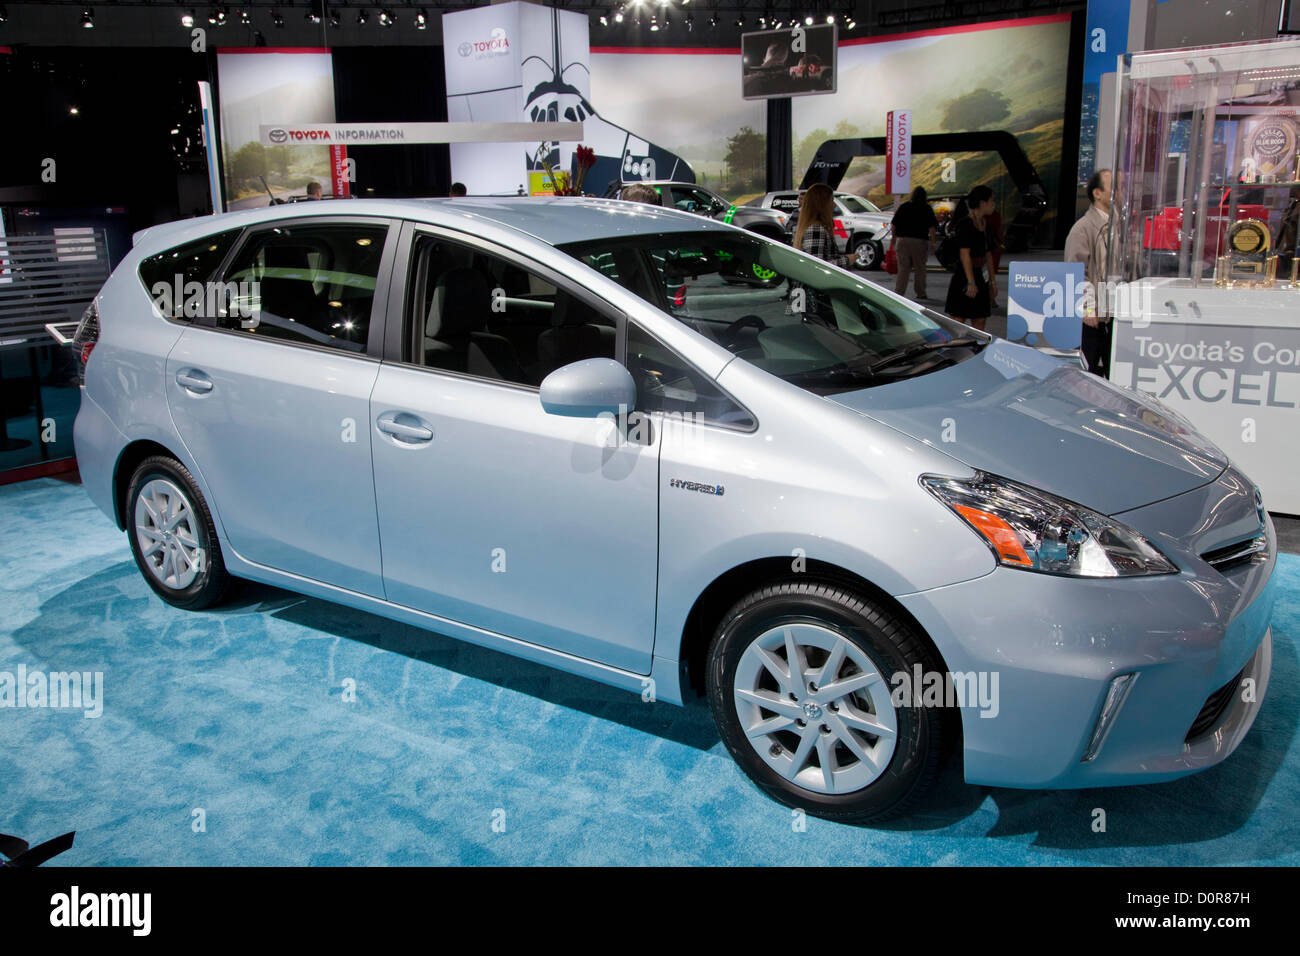 2013 Toyota Prius Hybrid. New 2013 Electric and Hybrid Green cars are featured at the Los Angeles Auto show on November 29, 2012. Los Angeles Convention Center, California, USA Stock Photo